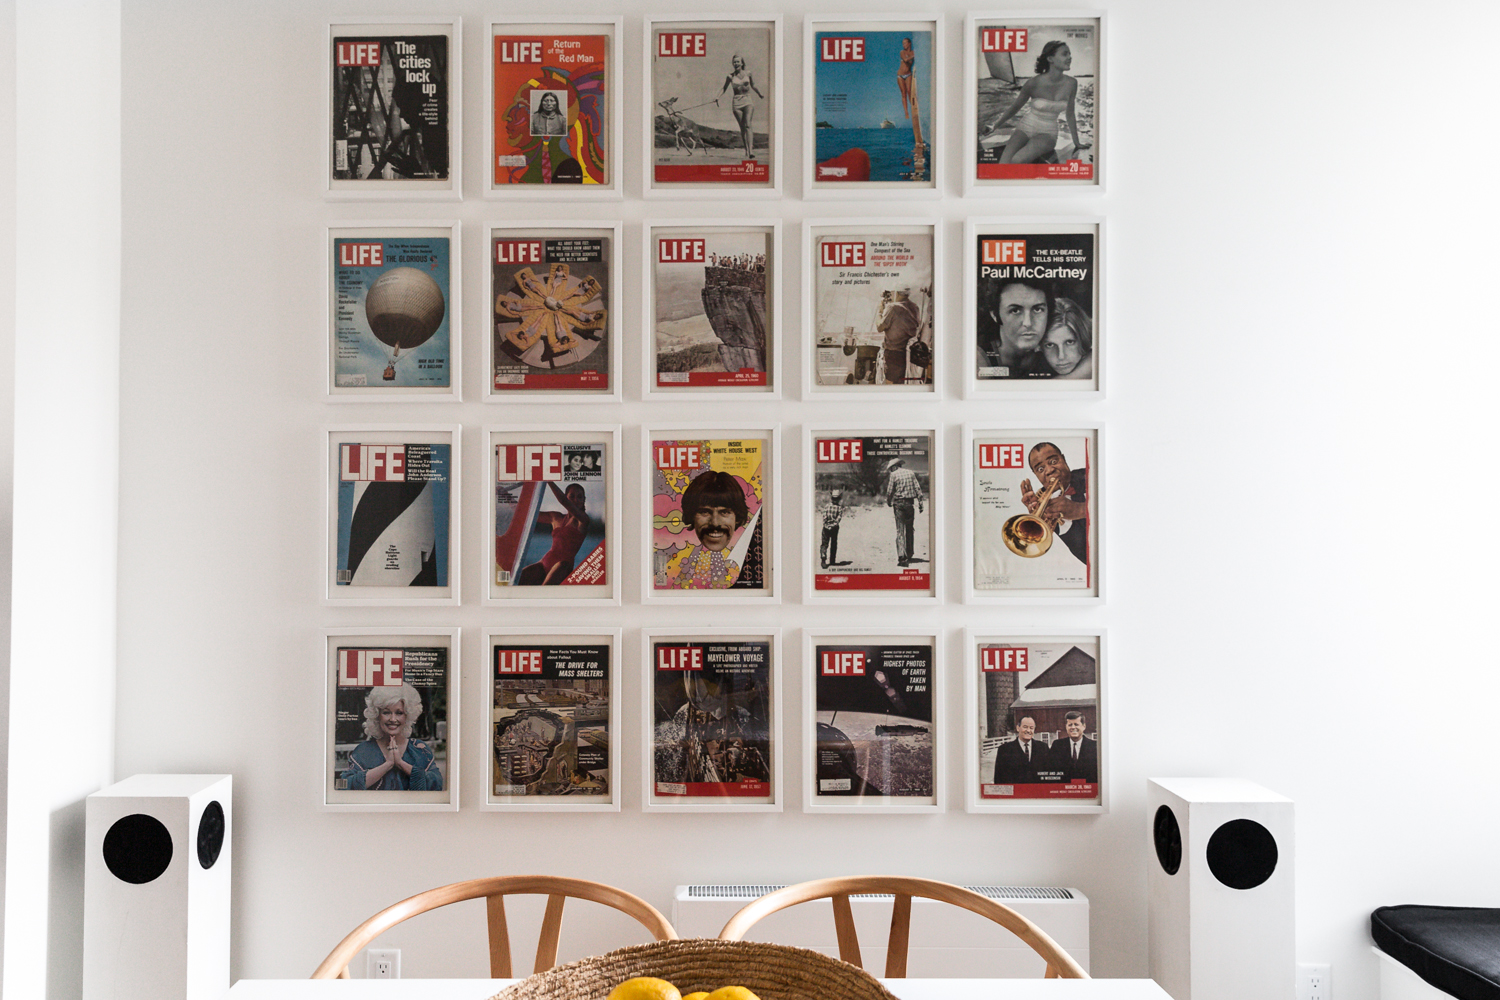 Creative gallery wall display using old 'Life' magazines.